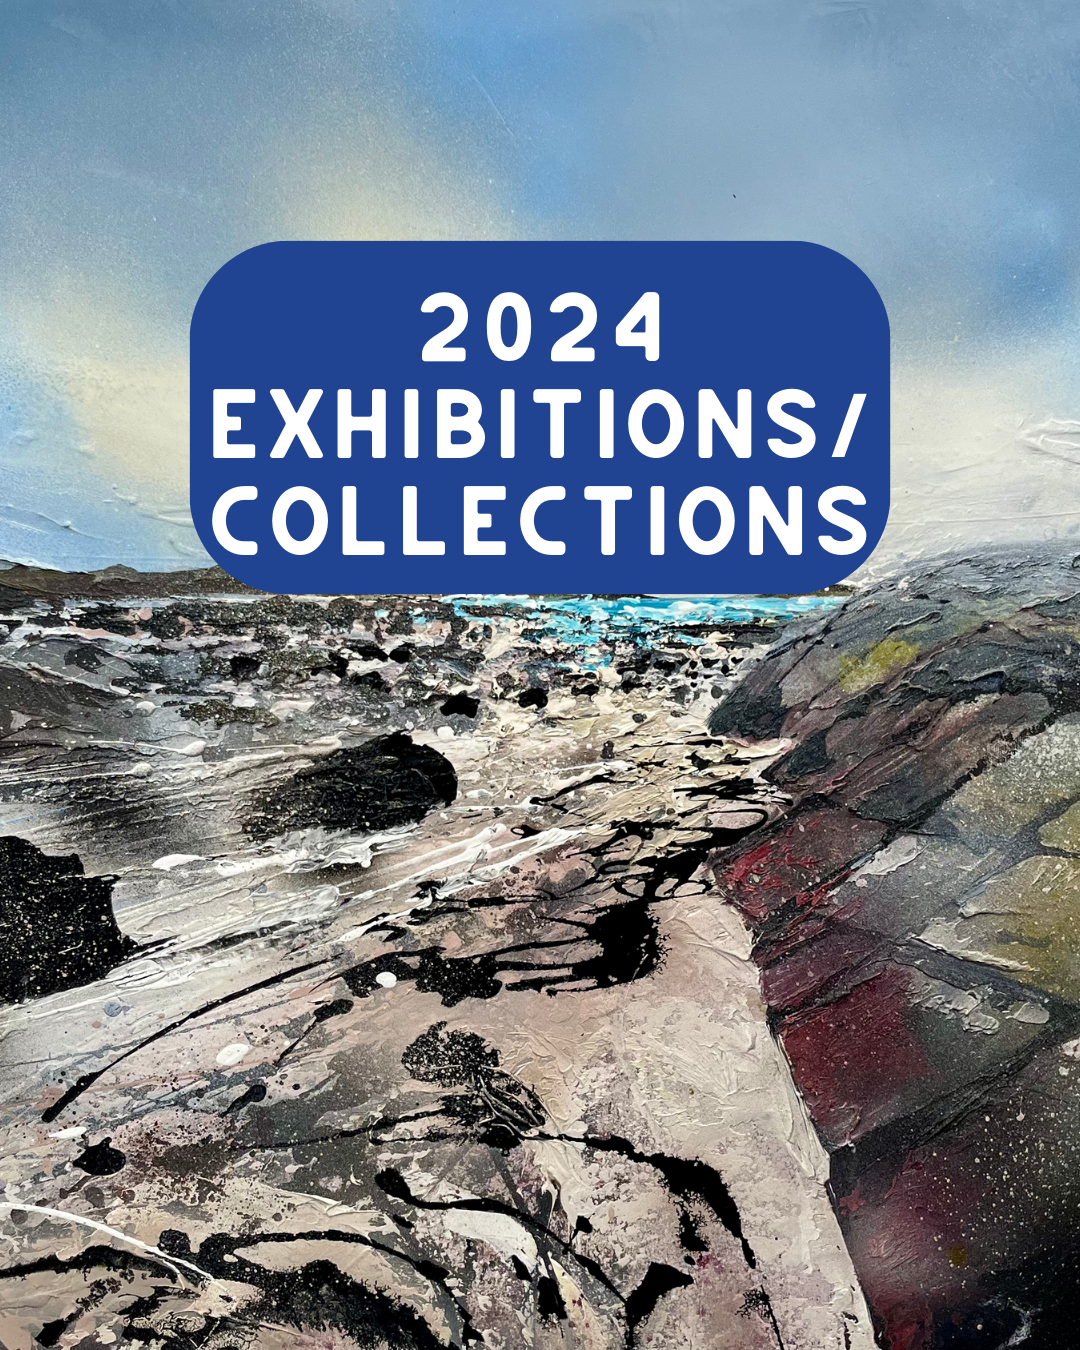 001 - 2024 EXHIBITIONS.png